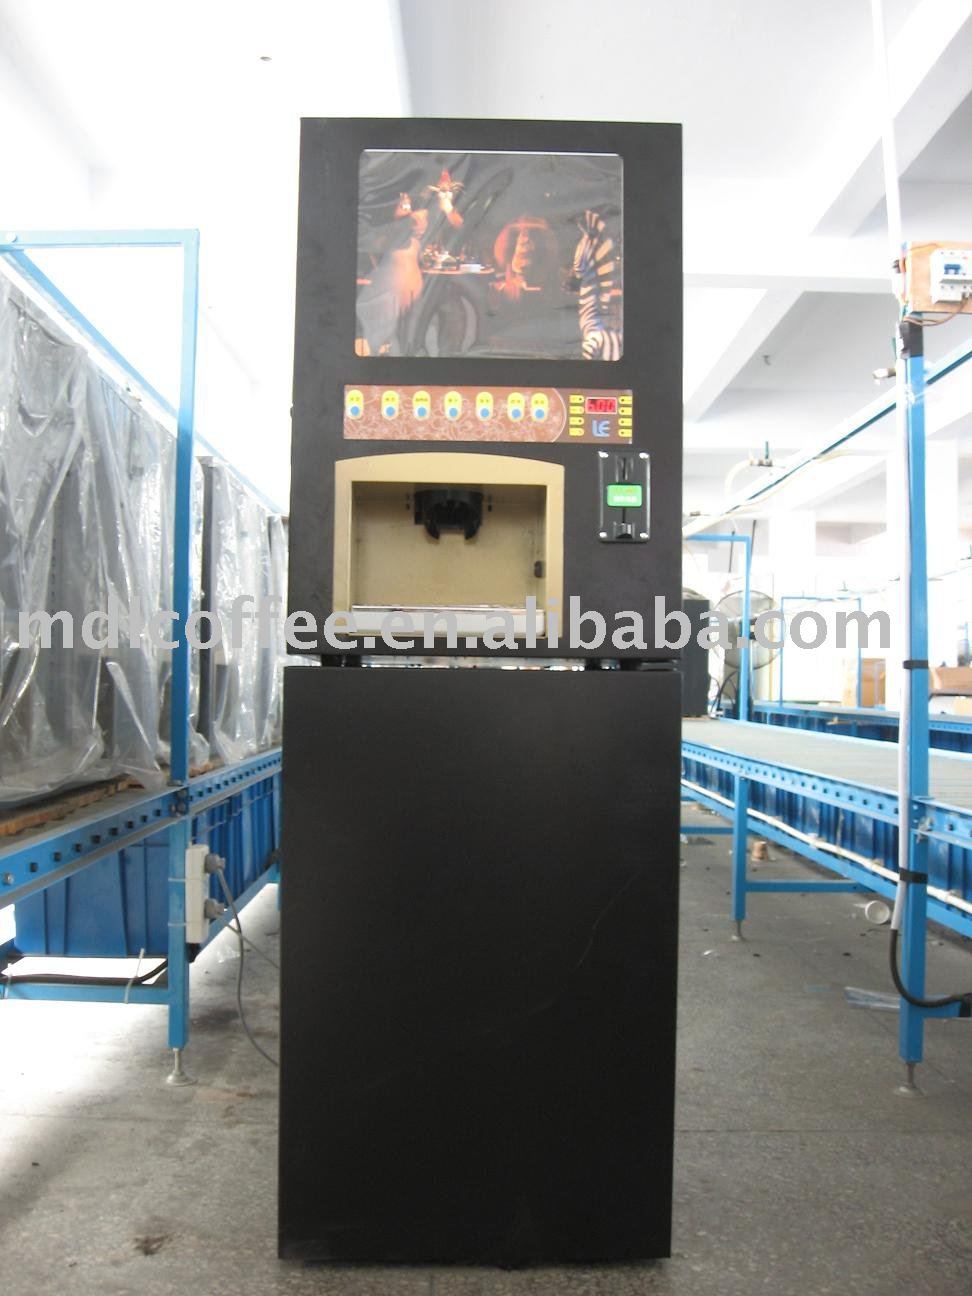 Coin Operated Coffee Vending Machine with LCD Display Lf-306D-17g